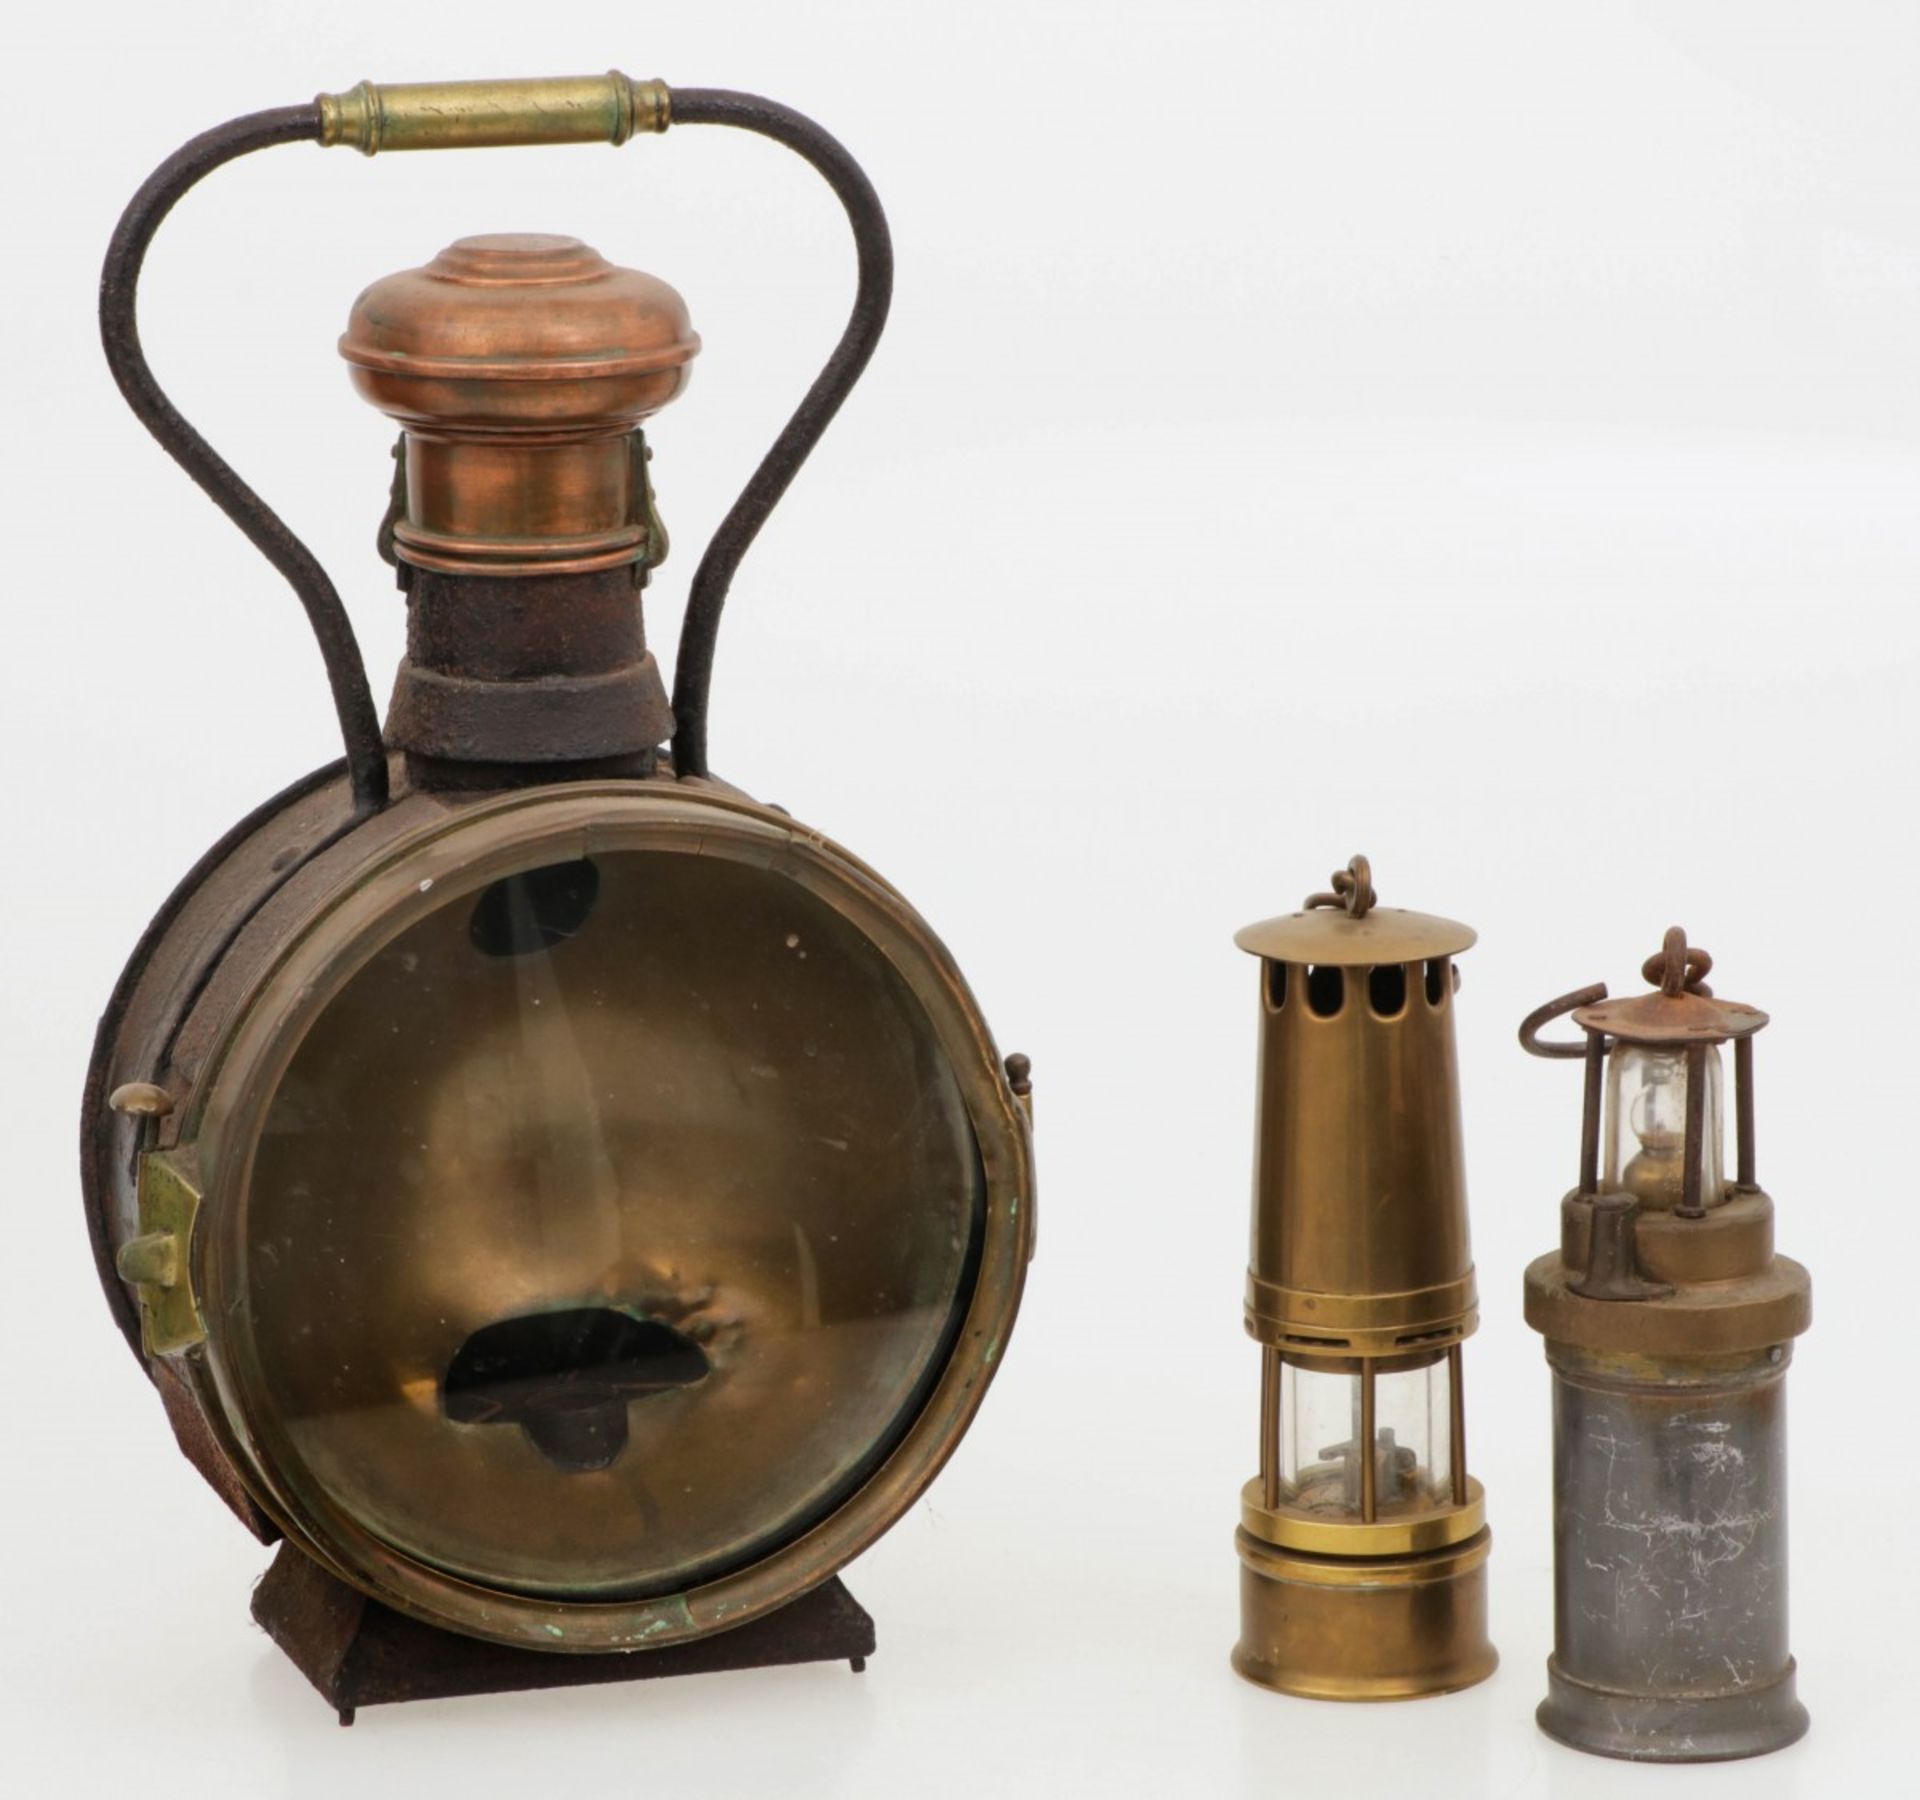 A railway lantern together with two miners' lamps, Dutch, ca. 1900 and later.